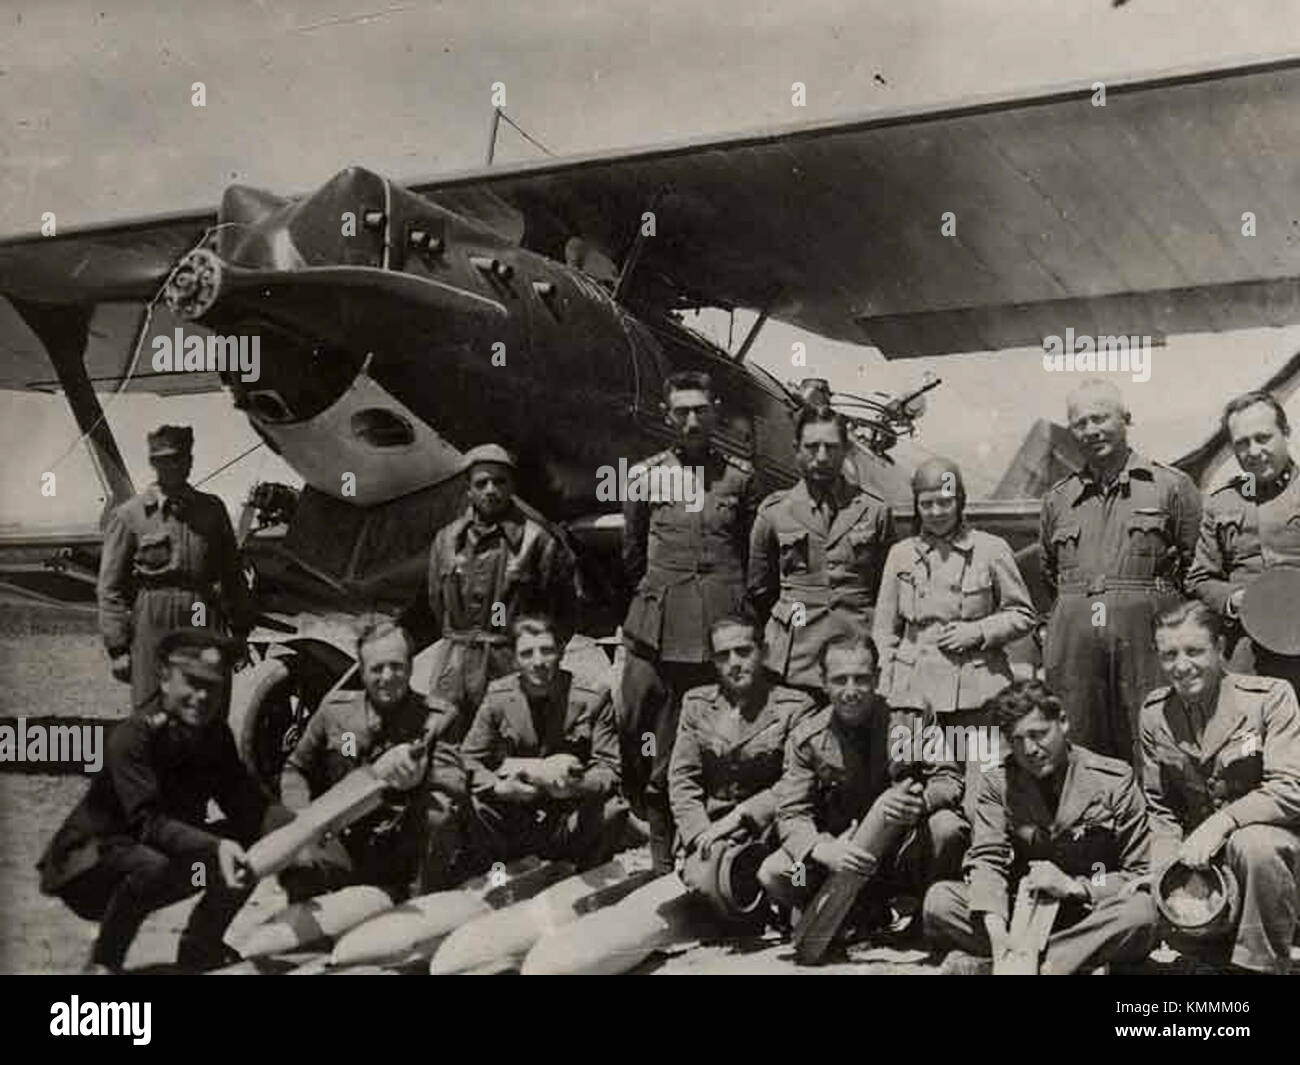 Sabiha Gokcen and her colleagues in front of Breguet 19 Stock Photo